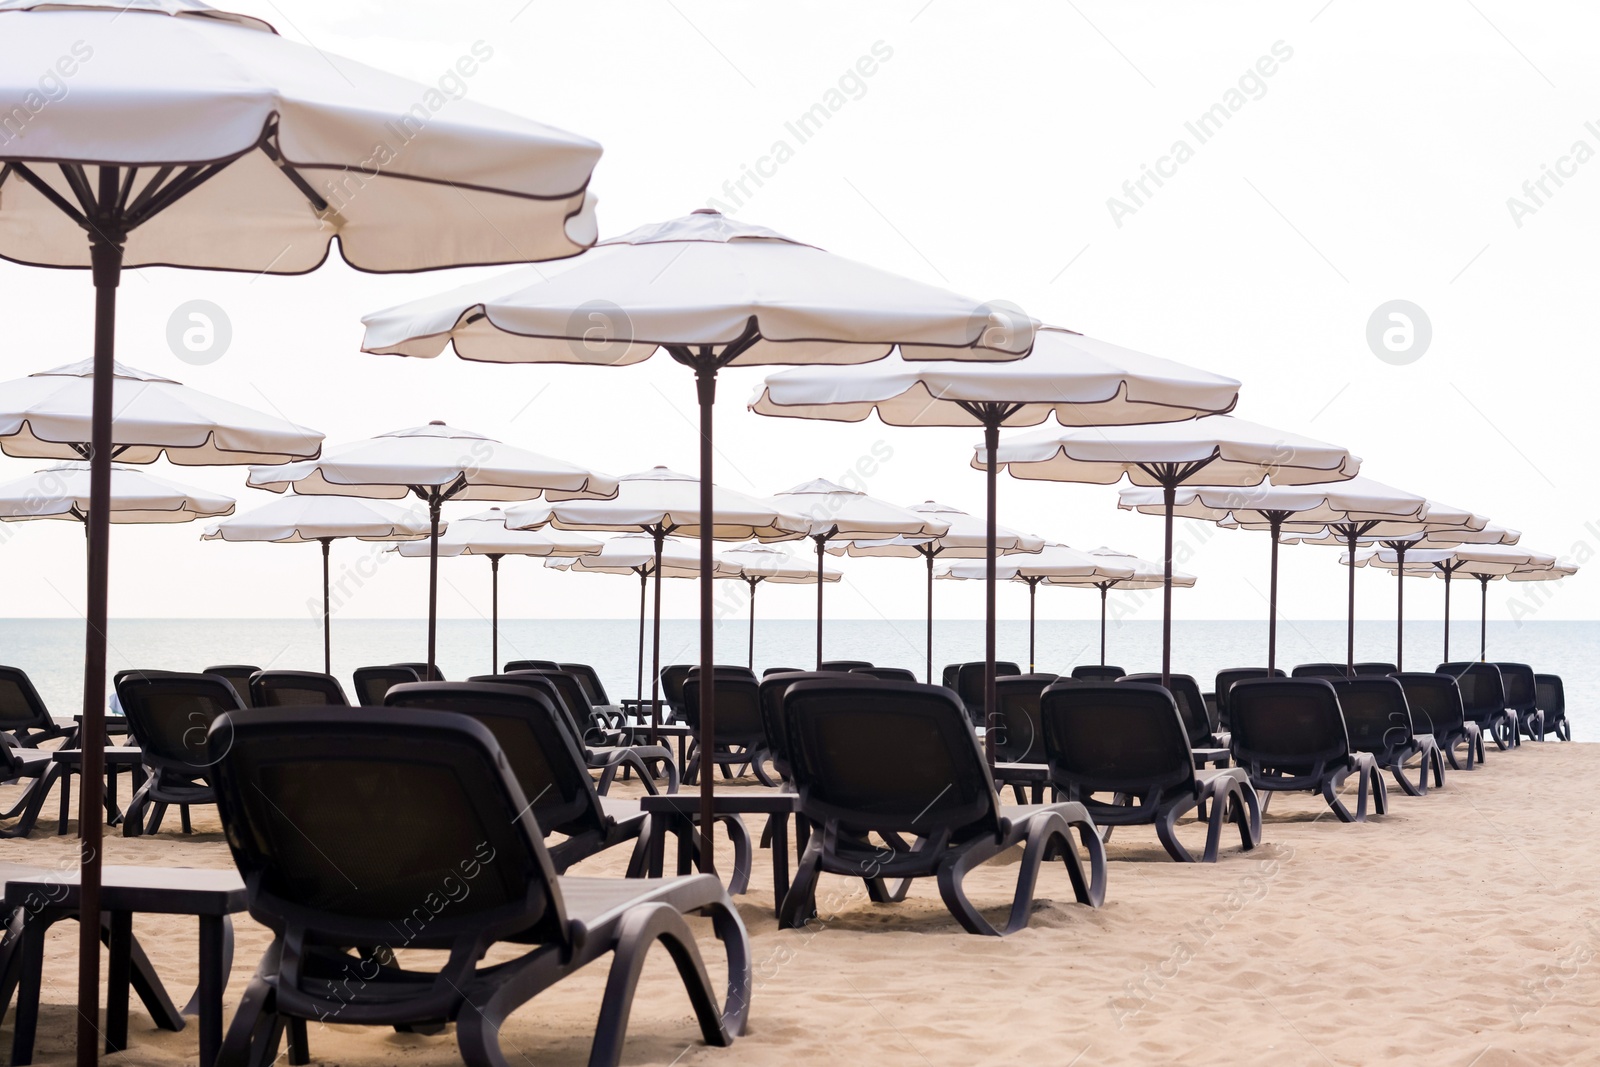 Photo of Many beautiful white umbrellas and black sunbeds on beach